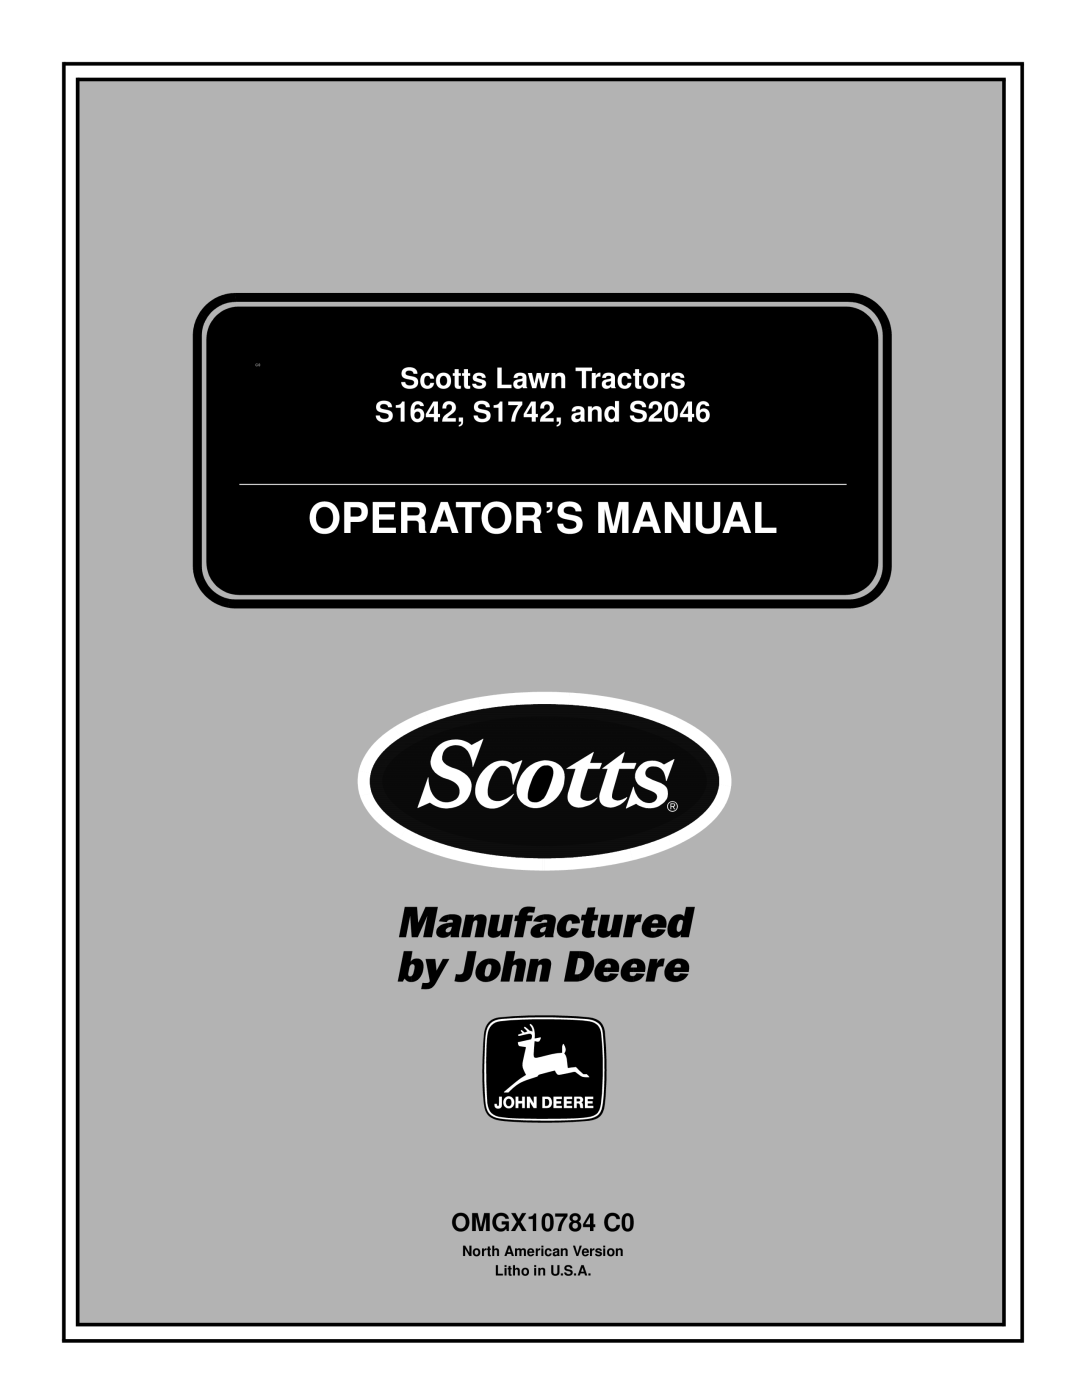 Scotts S1642, S1742, S2046 manual Operator’S Manual, Scotts Lawn Tractors, S1642, S1742, and S2046, OMGX10784 C0 